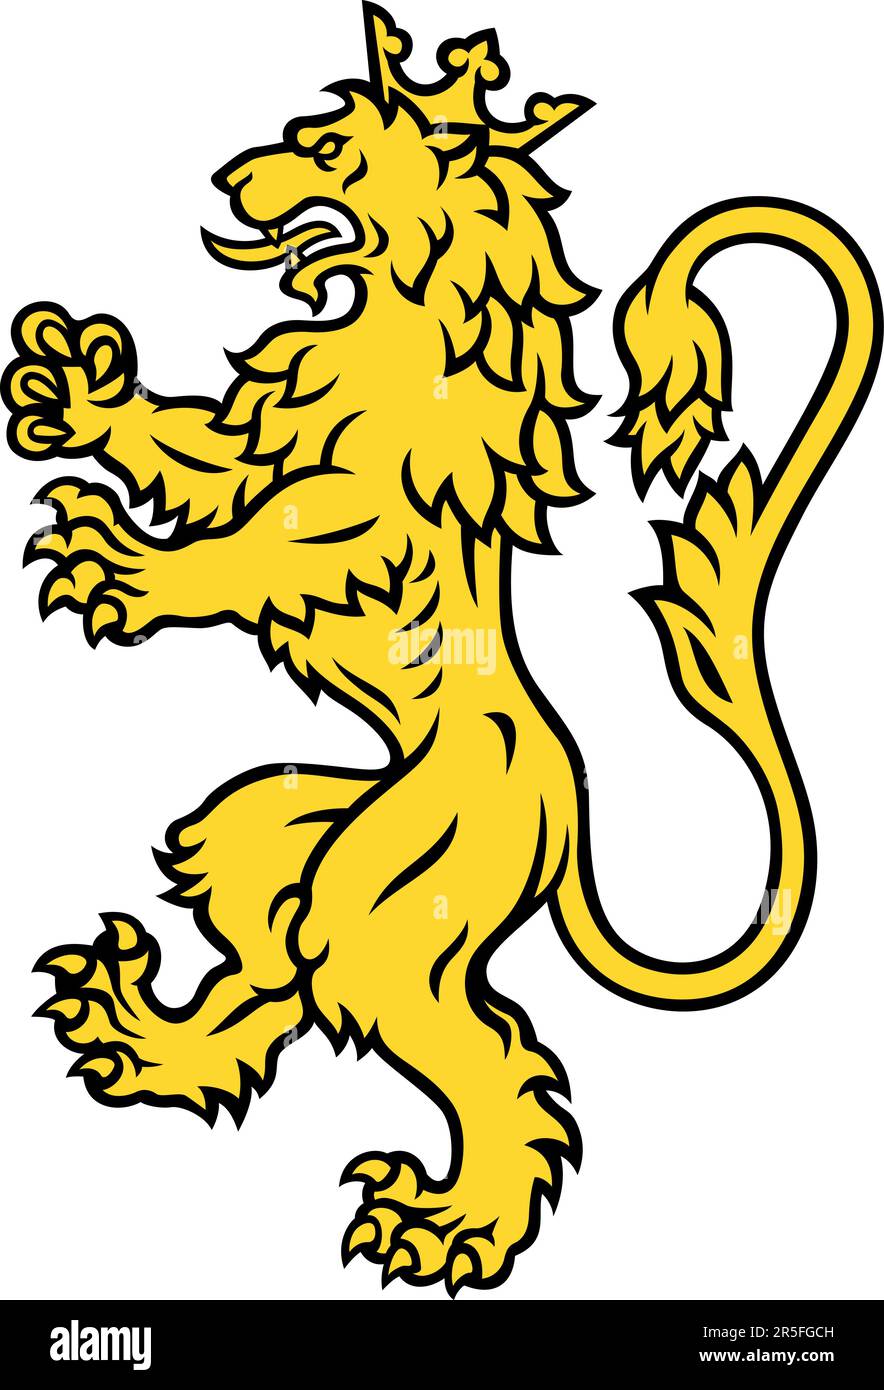 Royal Symbol Lion Standing Up with Crown Stock Vector